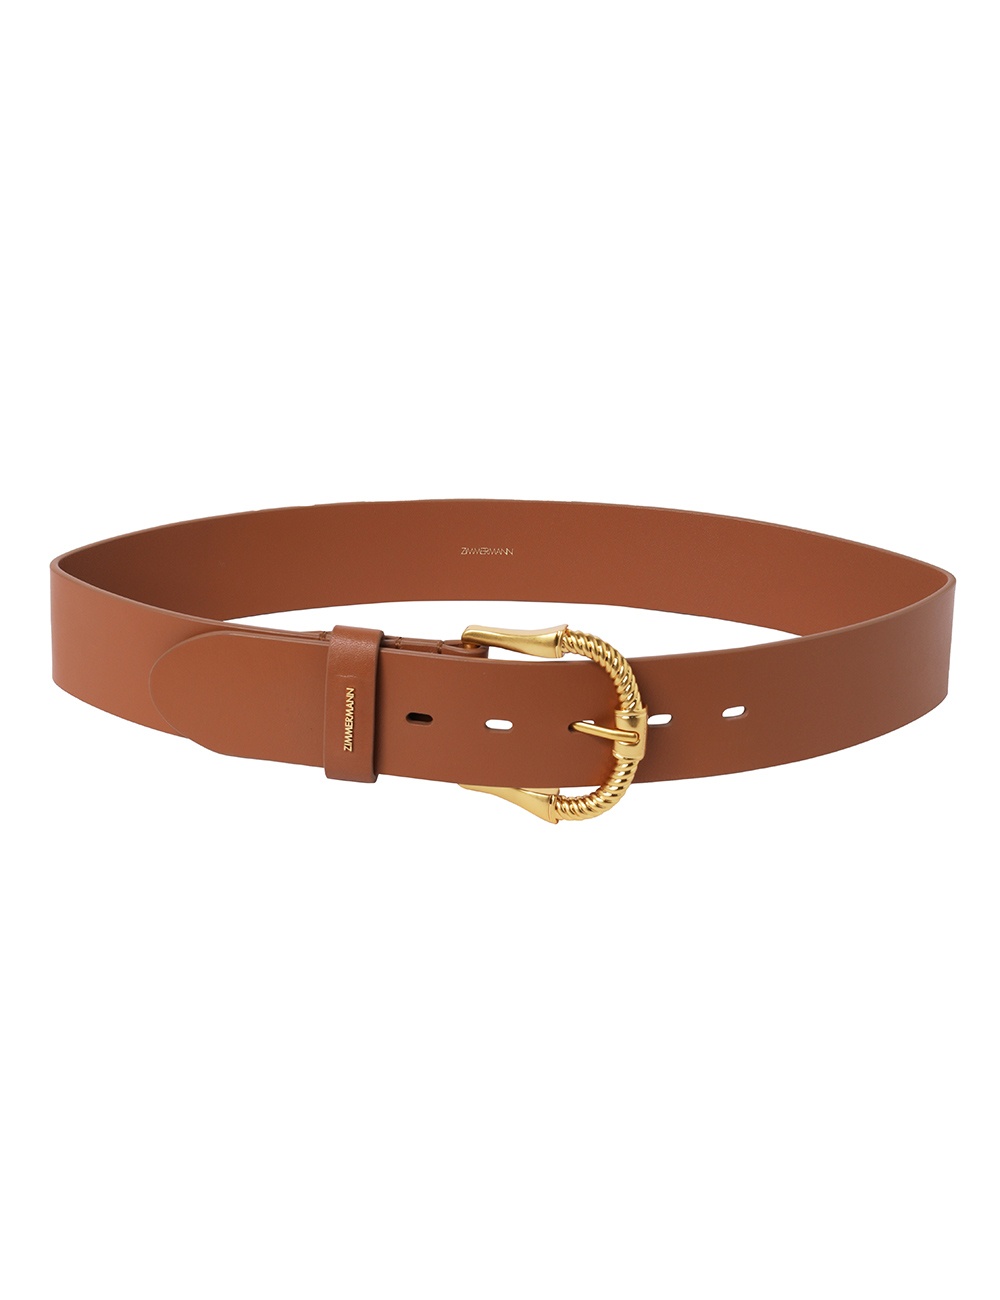 TWISTED BUCKLE LEATHER BELT 40 - 1